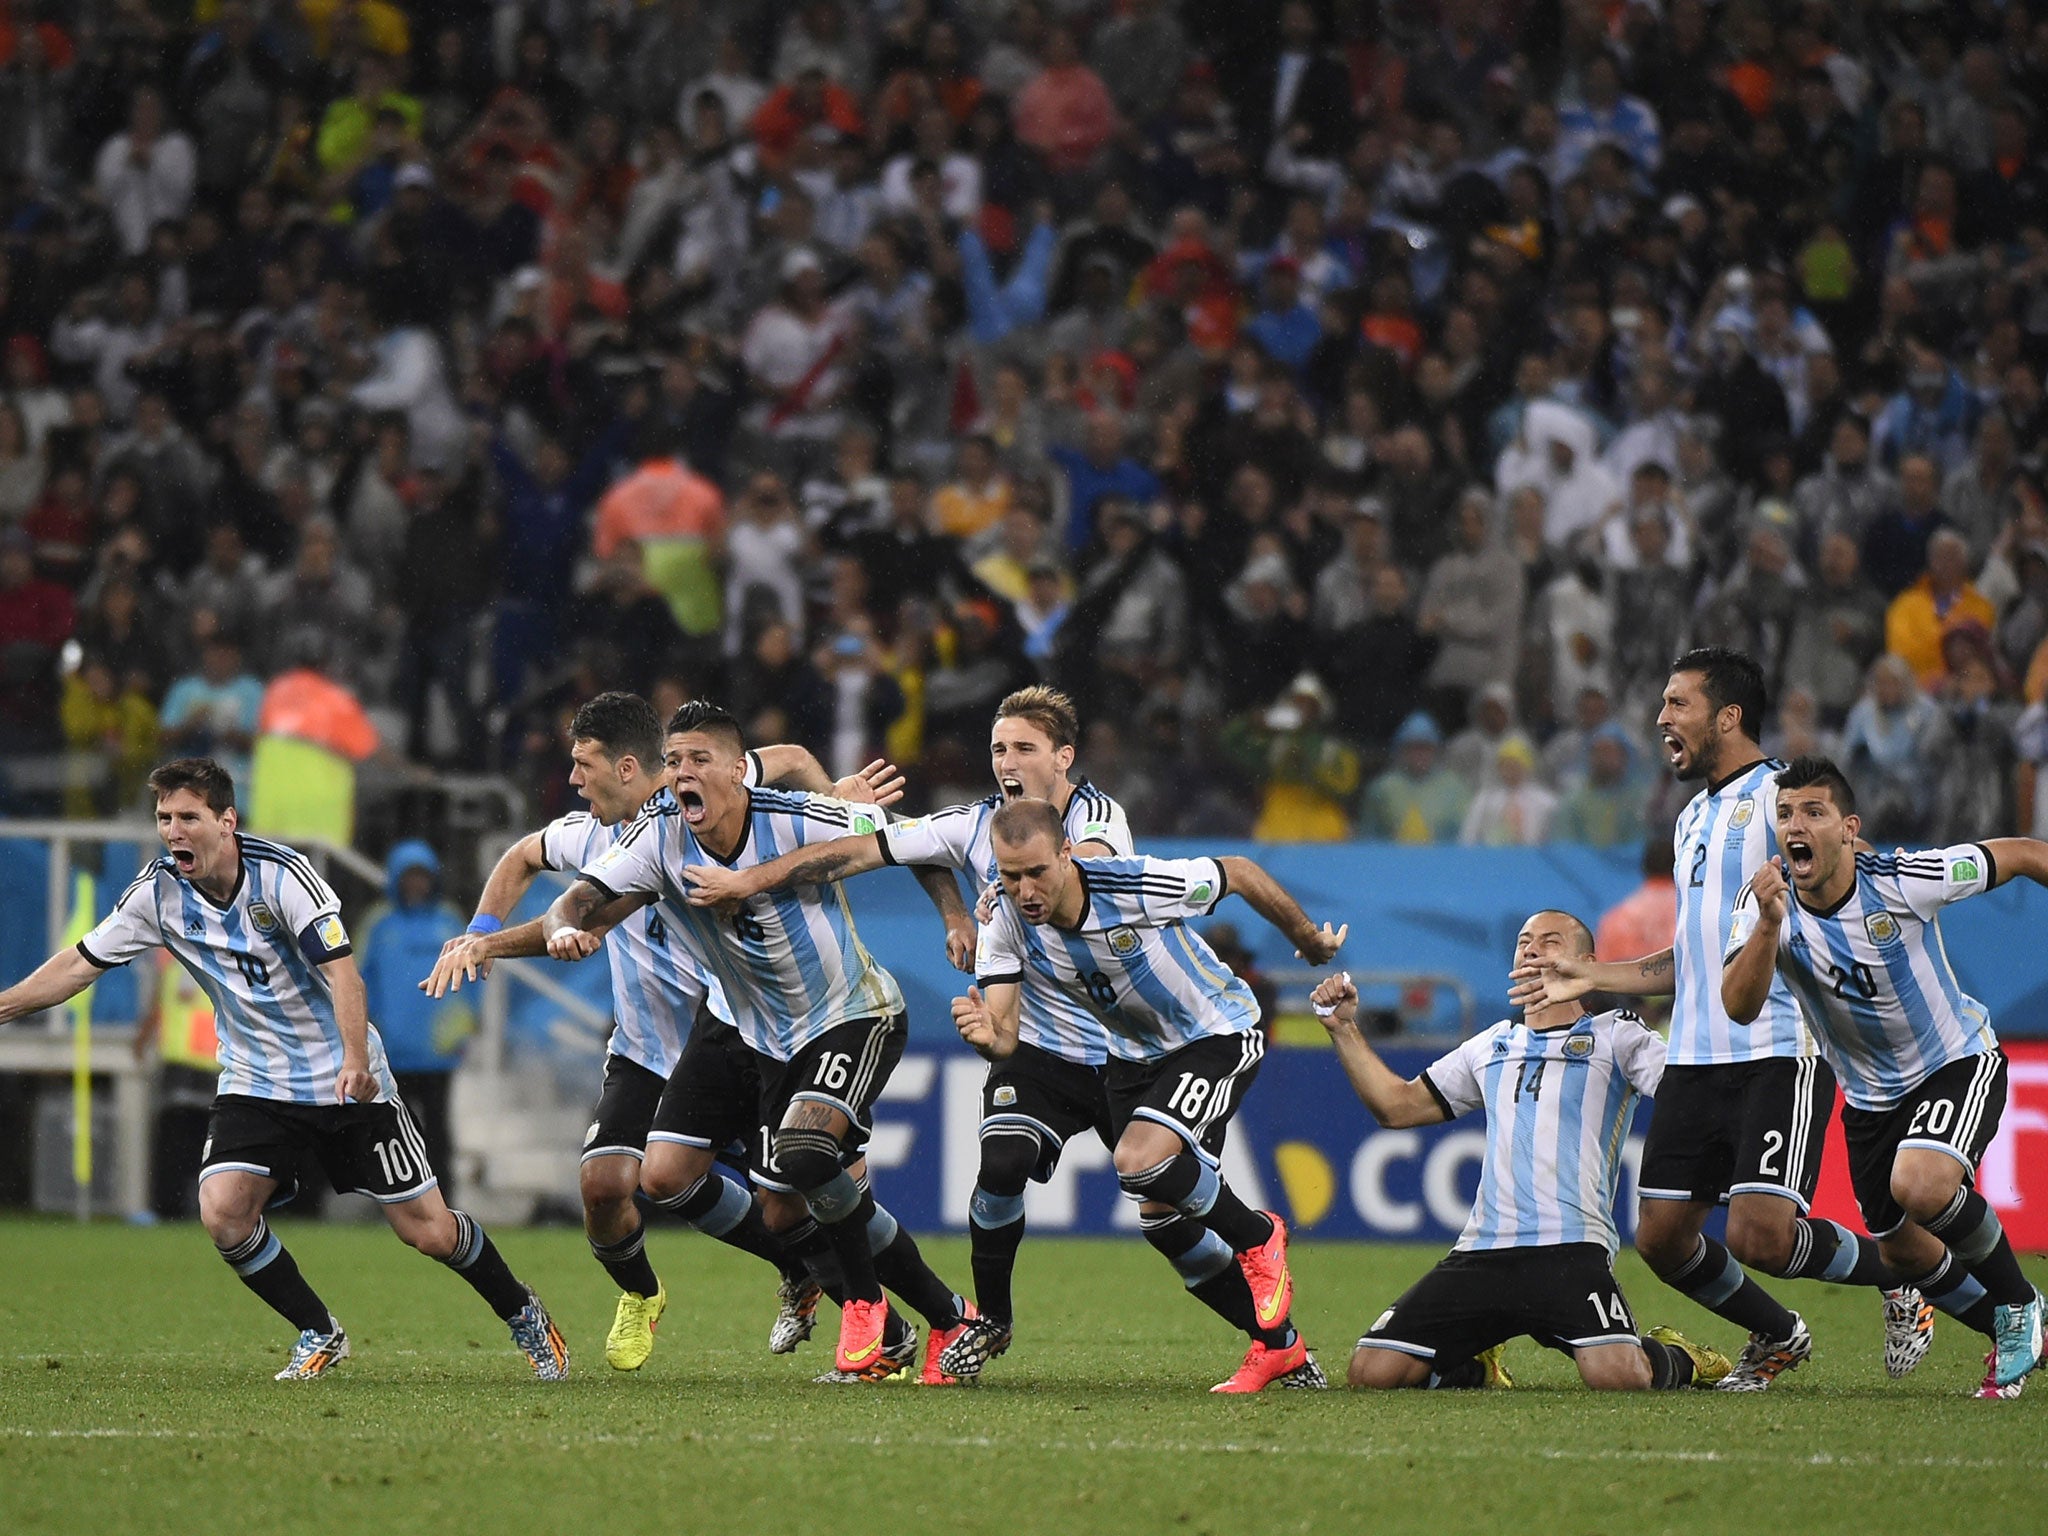 The Argentina players celebrate the victory